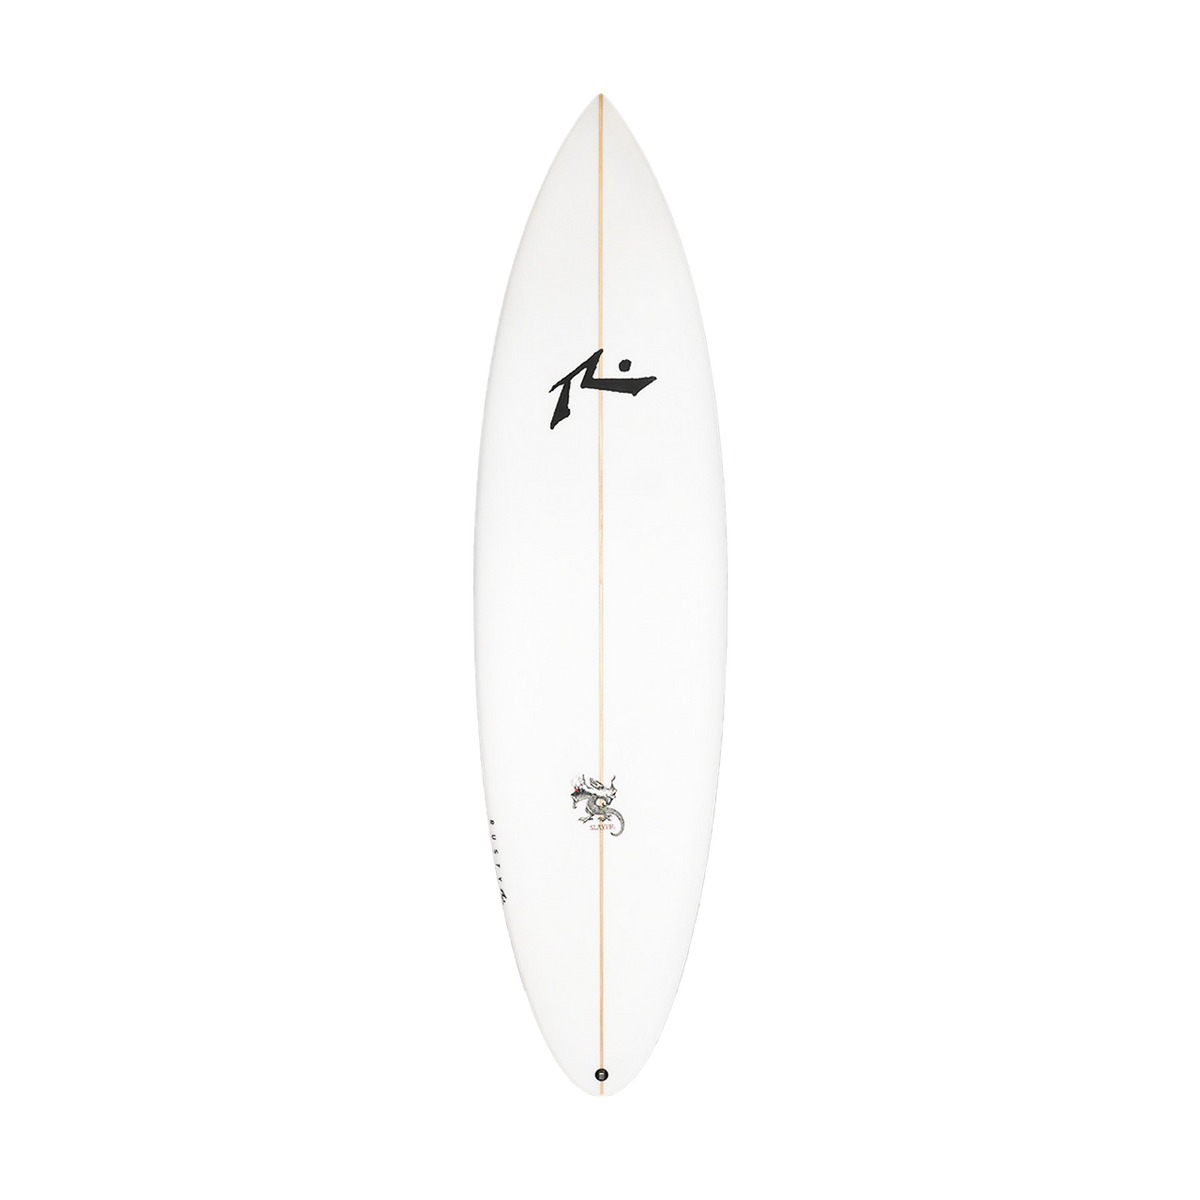 Slayer Step Up Surfboard - Rusty Surfboards - Deck View